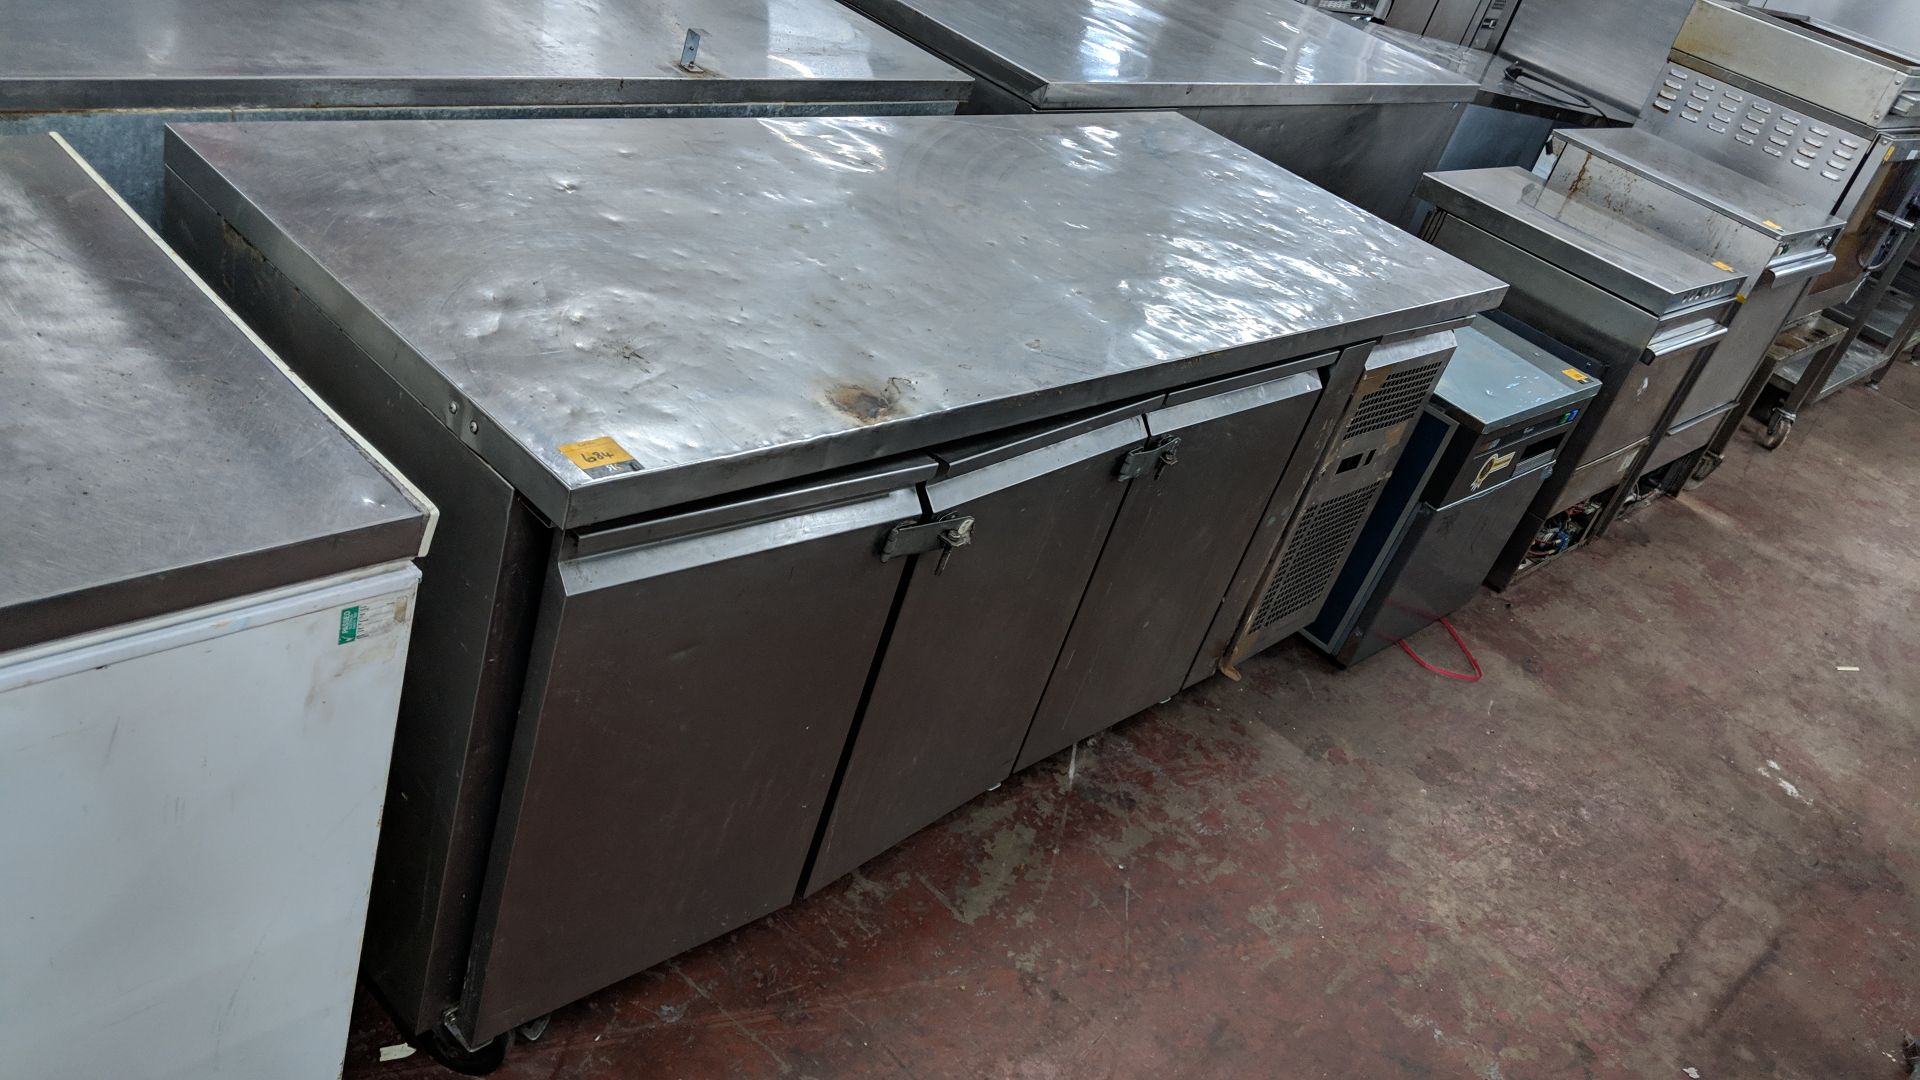 Stainless steel refrigerated prep cabinet IMPORTANT: Please remember goods successfully bid upon - Image 4 of 4